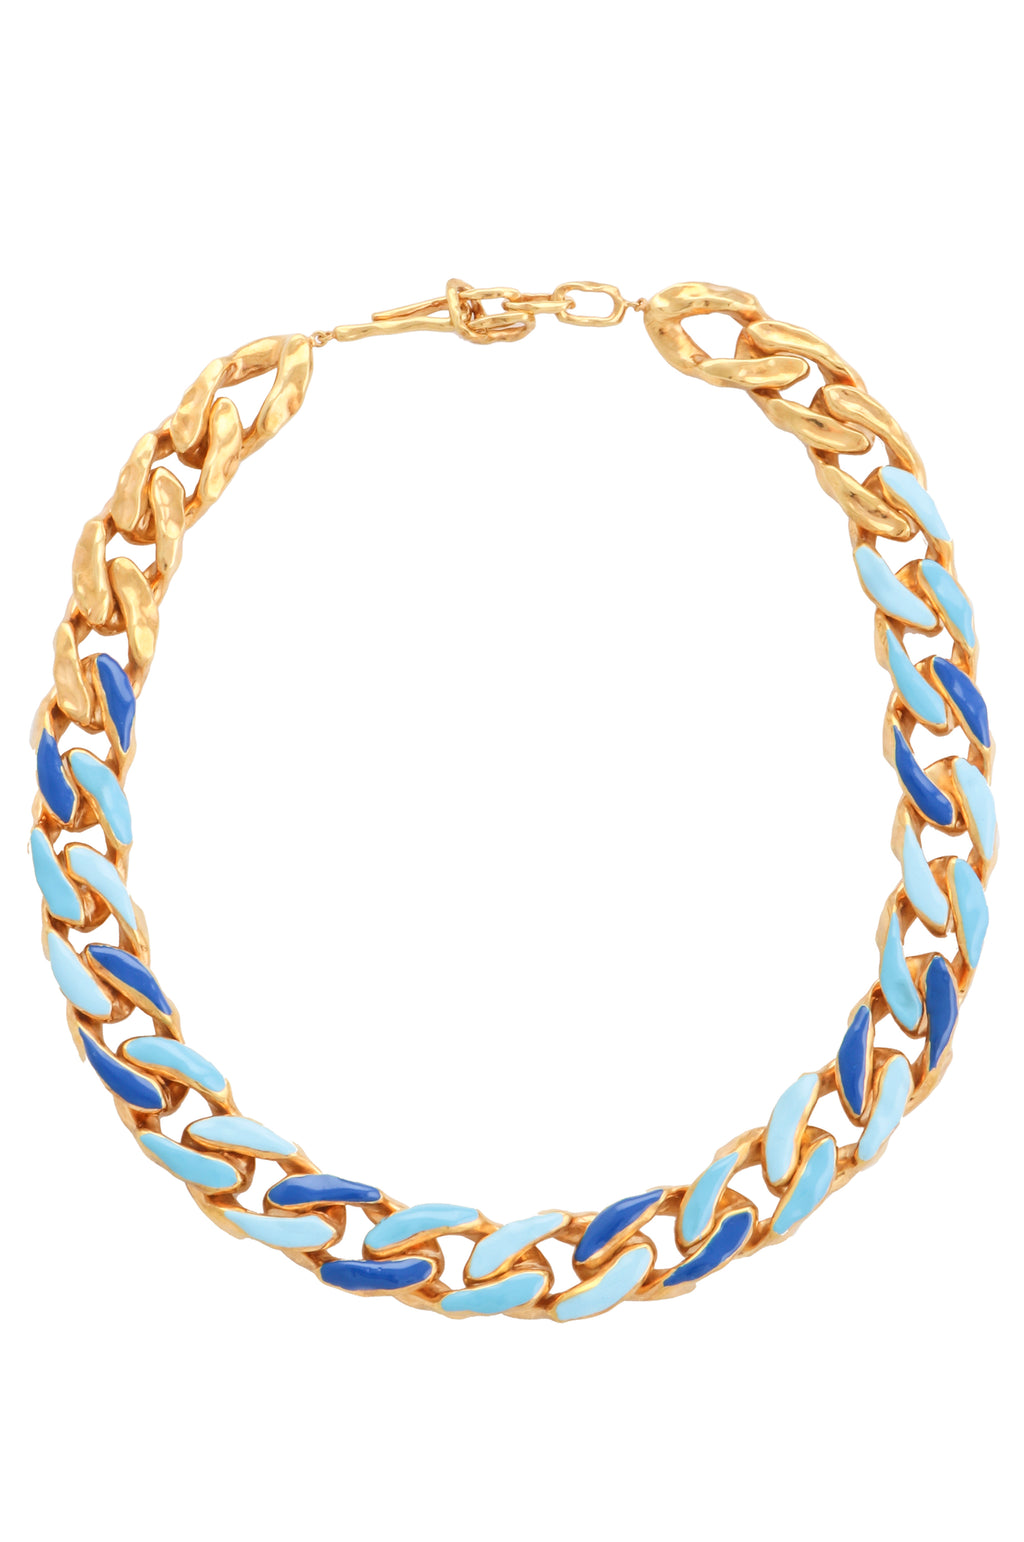 STATEMENT WAVE CHAIN NECKLACE WITH ENAMEL